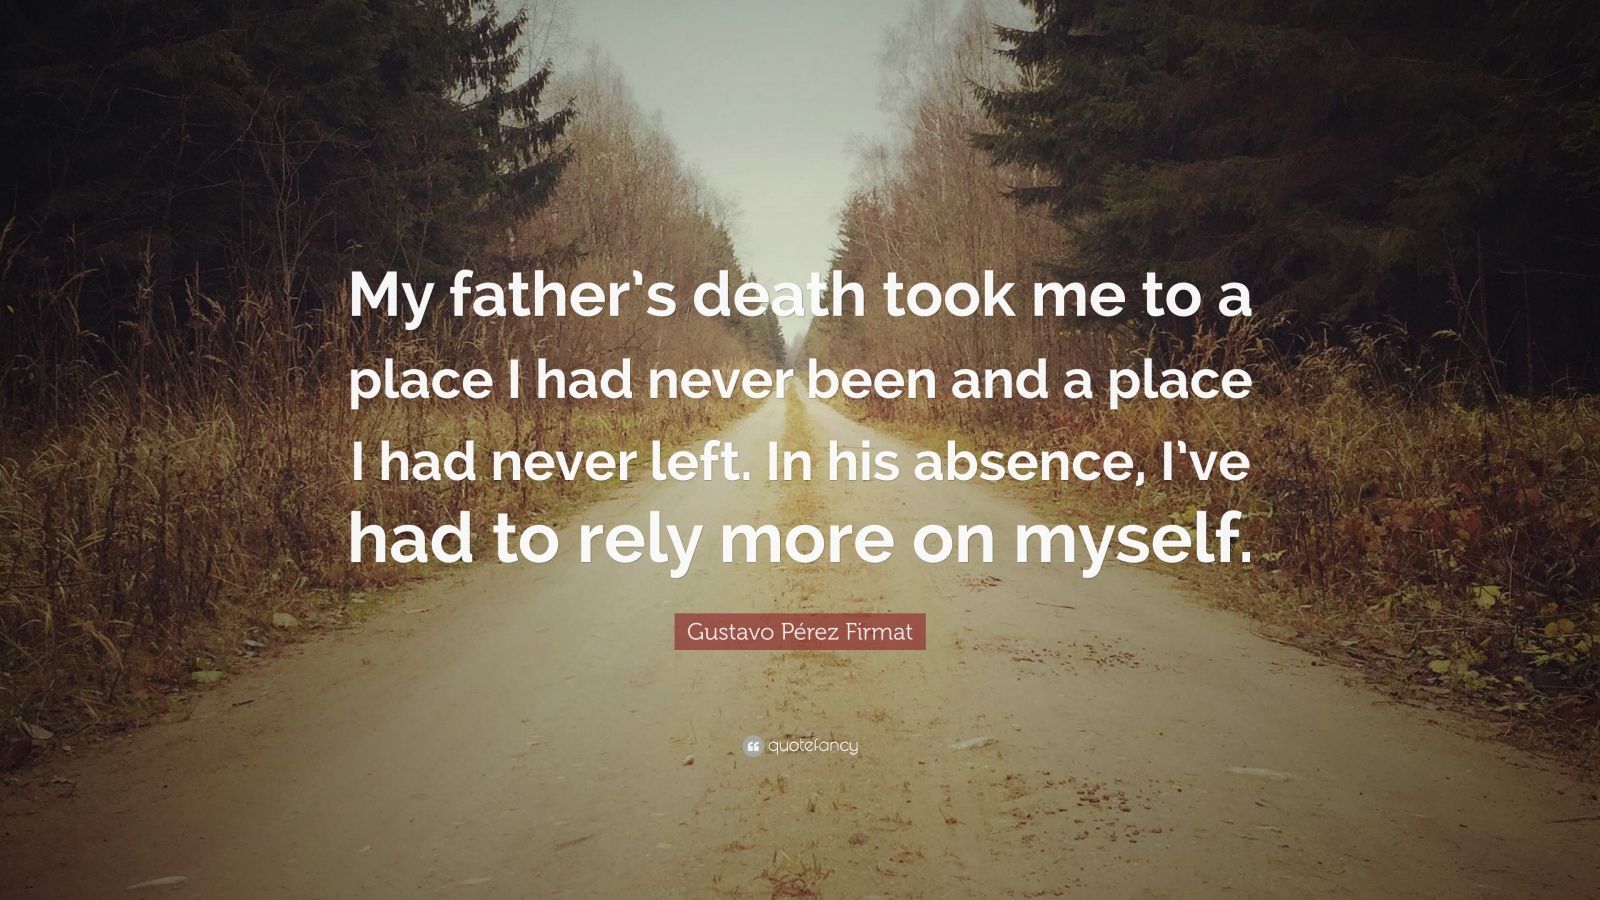 Gustavo Pérez Firmat Quote “My father’s death took me to